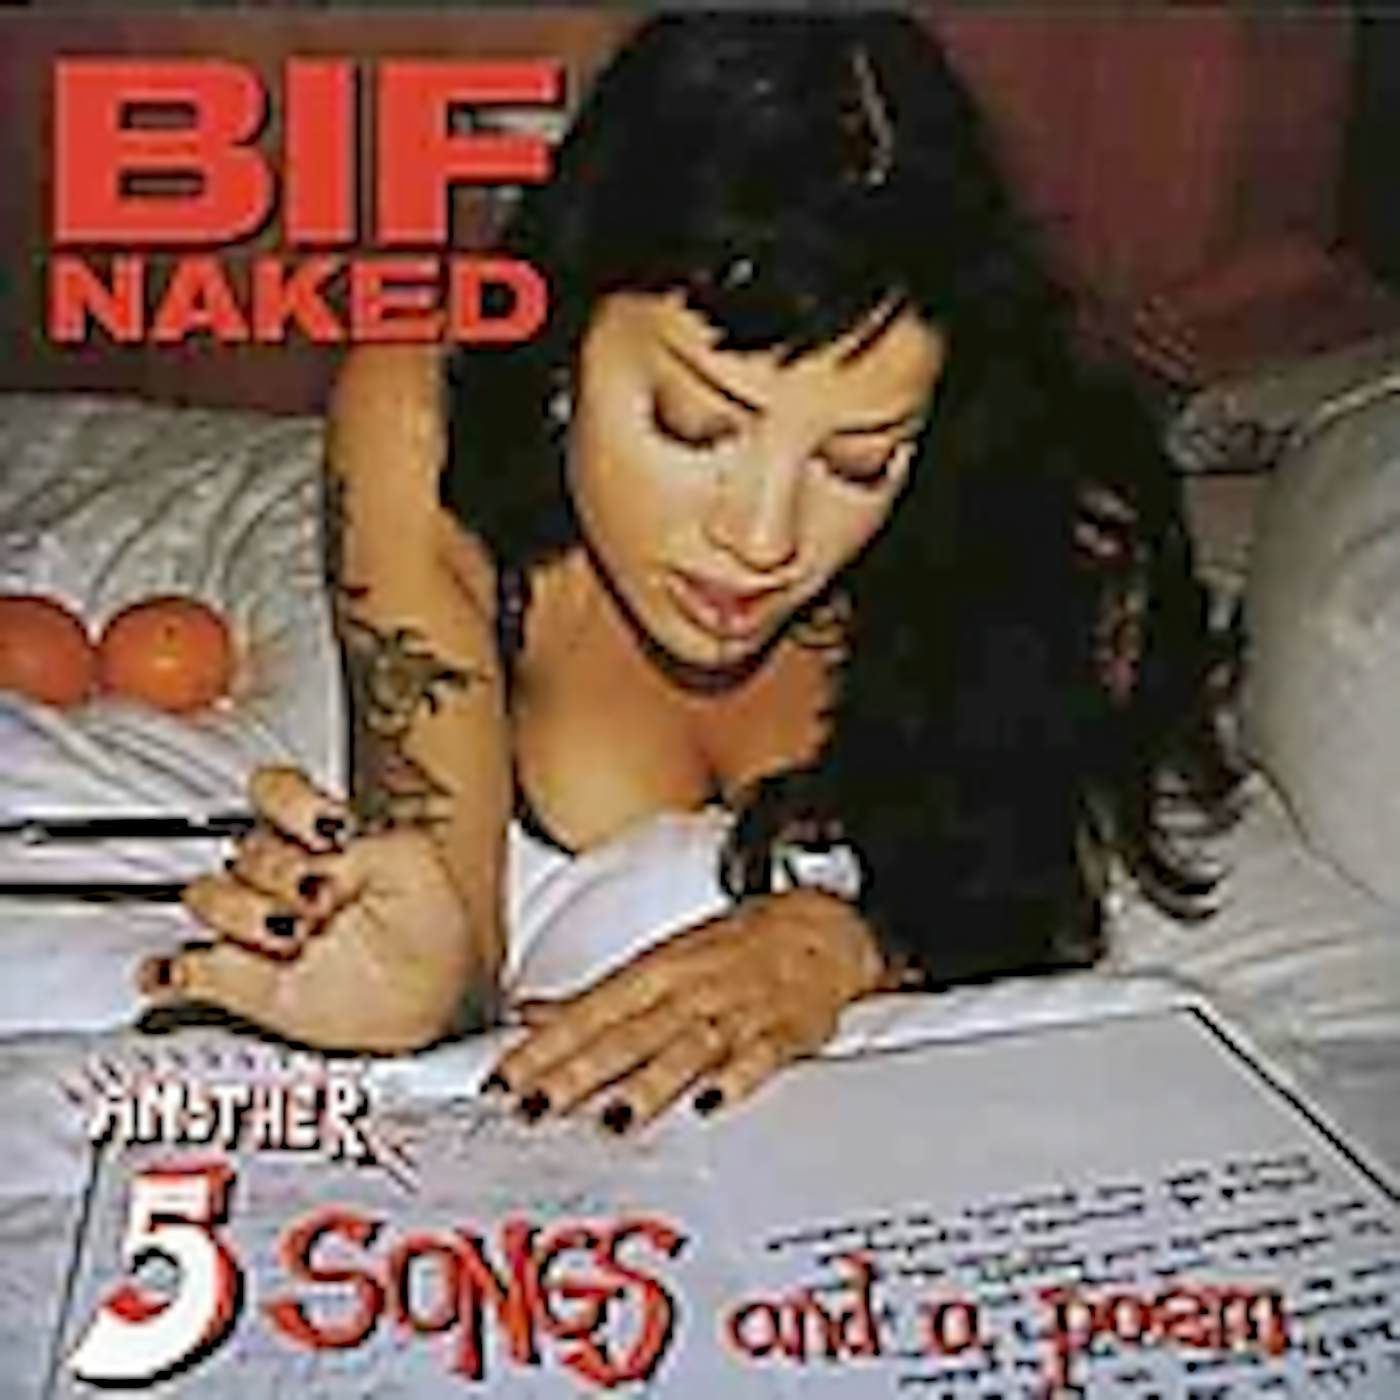 Bif Naked ANOTHER 5 SONGS & A POEM CD